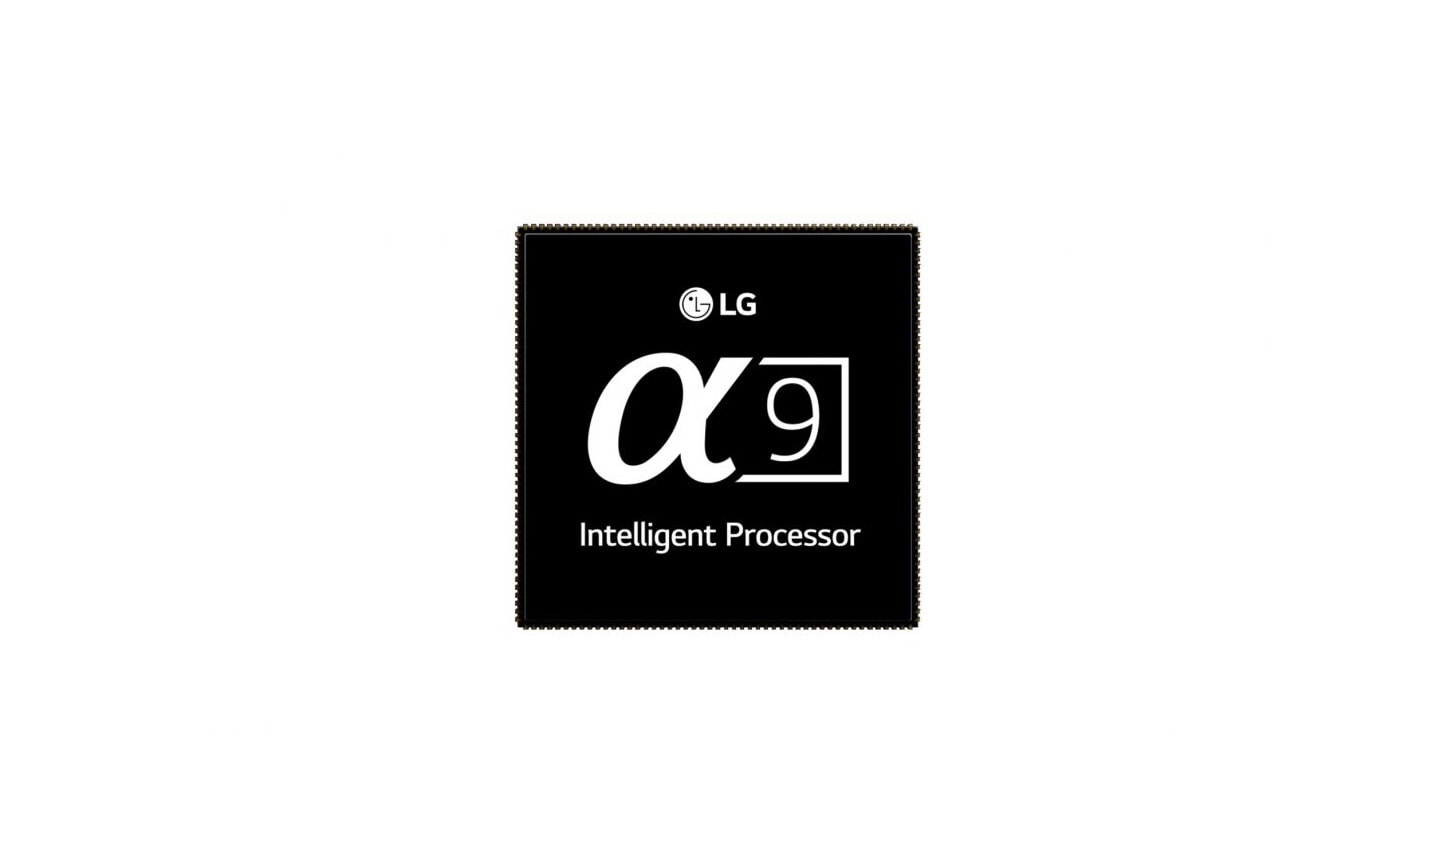 A chipset of the LG A9 Intelligent Processor